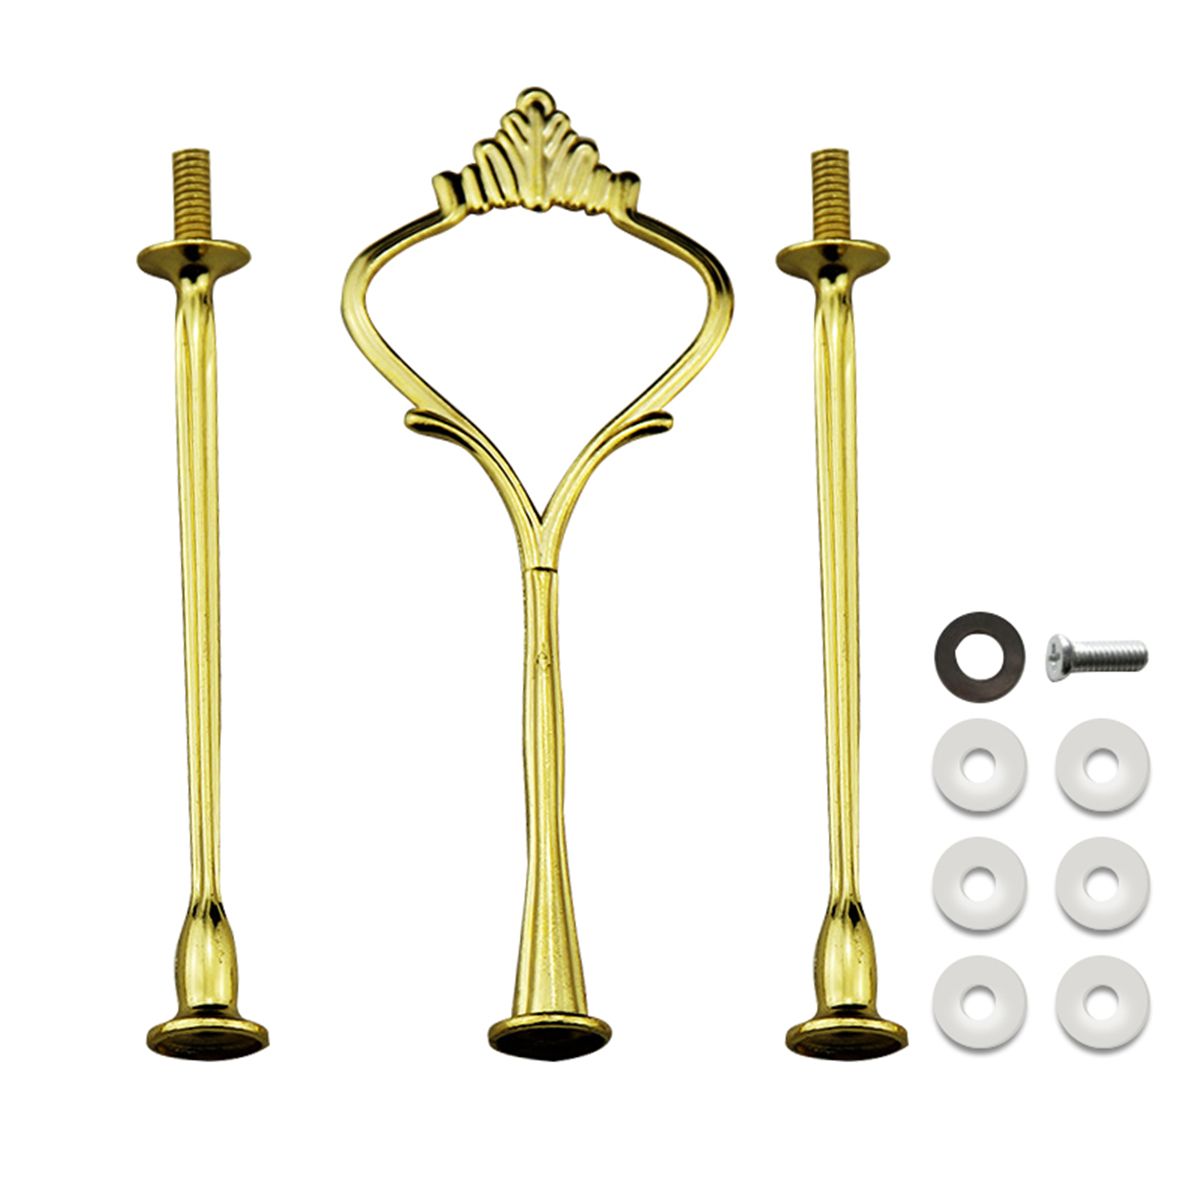 Tier-Cake-Cupcake-Plate-Gold-Stand-Rack-Fittings-Handle-Rod-Wedding-Party-Decor-Supplies-1493857